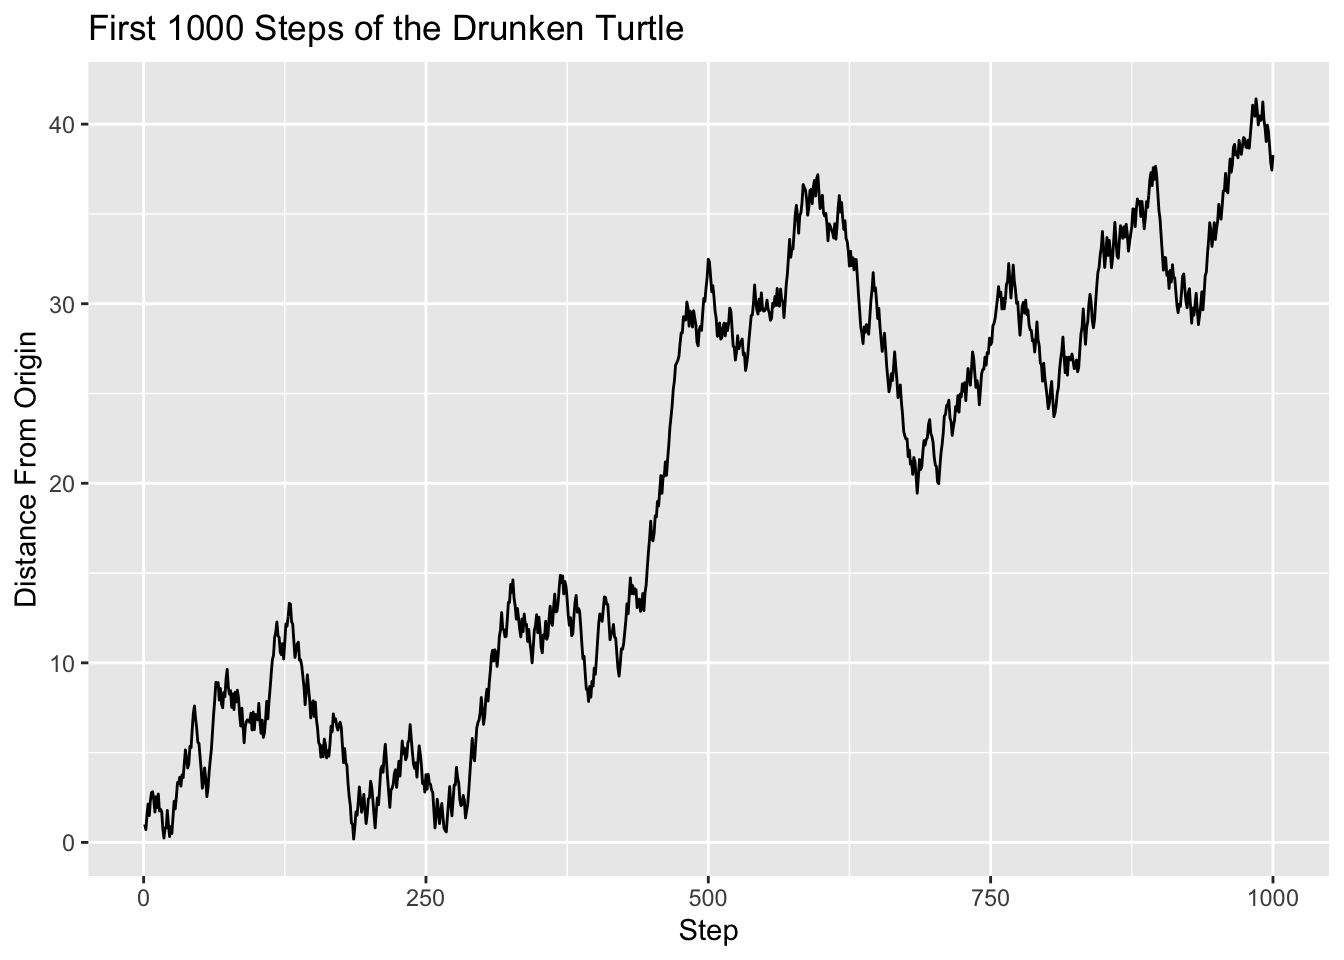 Line plot of the Turtle's distance from the origin, as a function of how many steps the turtle has taken.